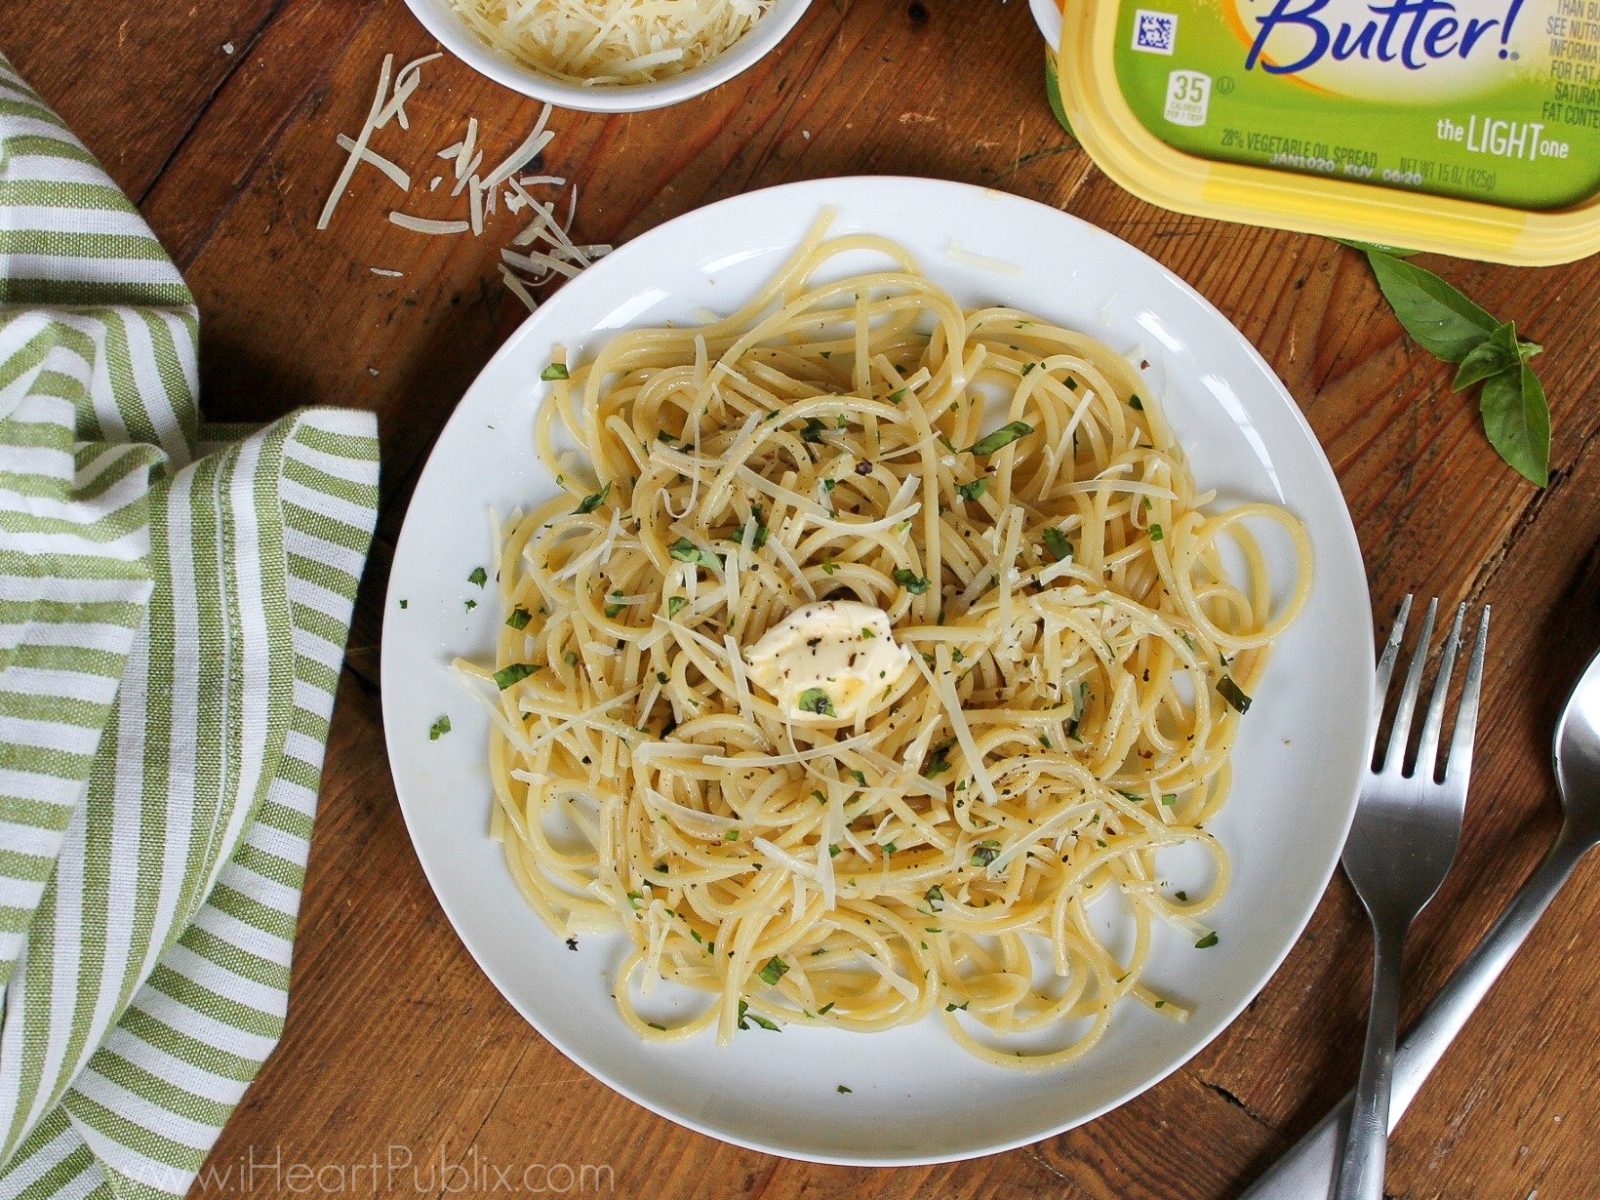 Buttered Herb Pasta – Super Easy & Delicious Recipe To Go With The I Can’t Believe It’s Not Butter! BOGO Sale